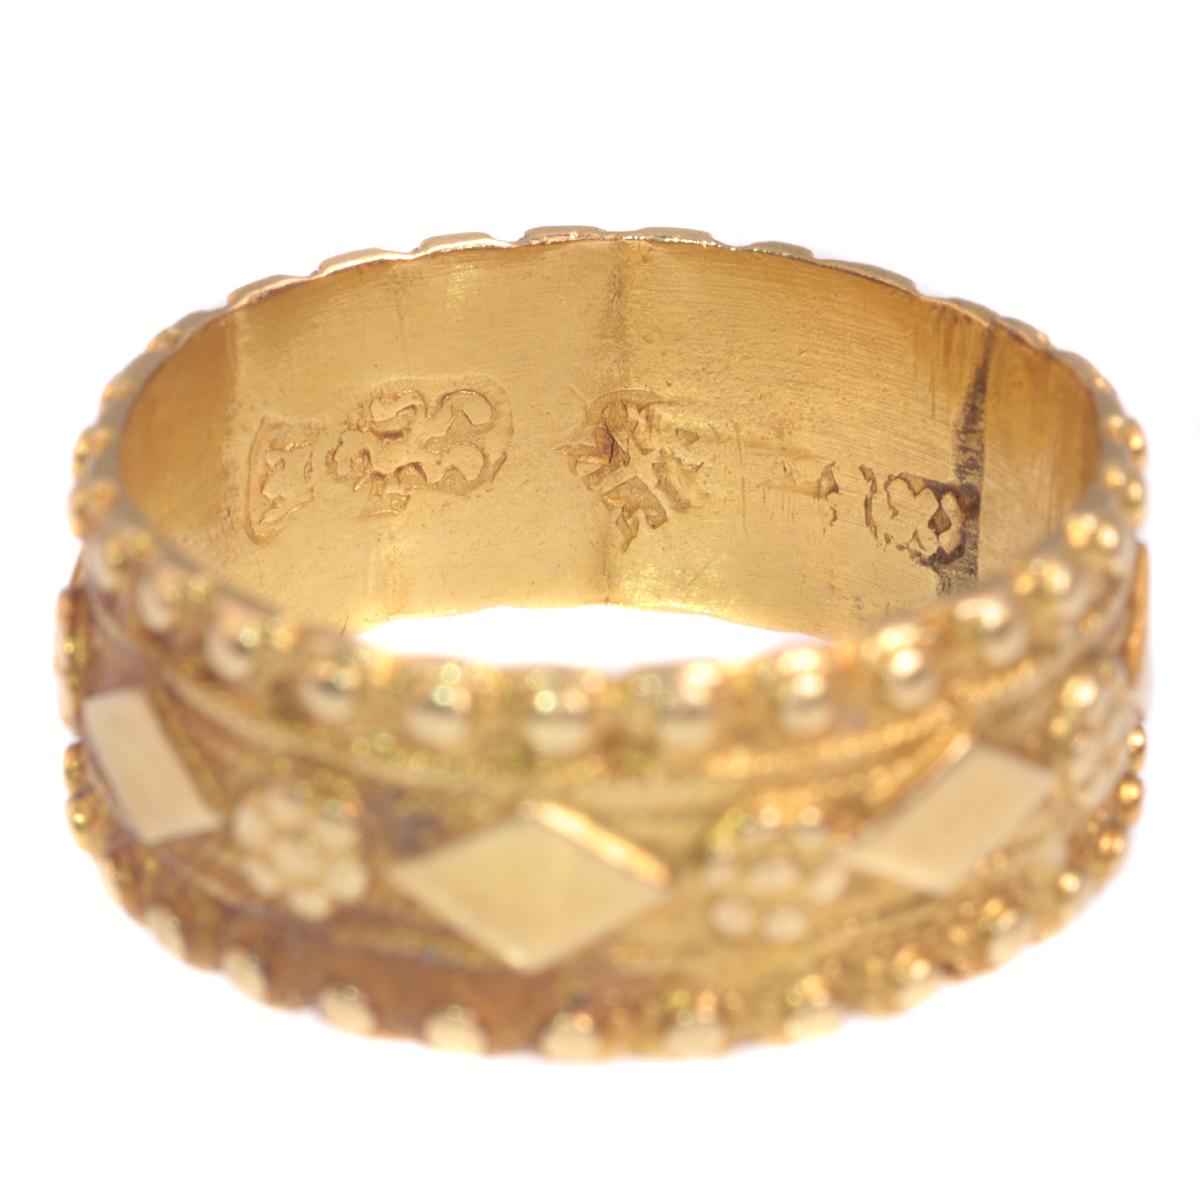 Late 18th Century Rococo Dutch Gold Ring with Amsterdam Hallmarks, 1780s For Sale 3